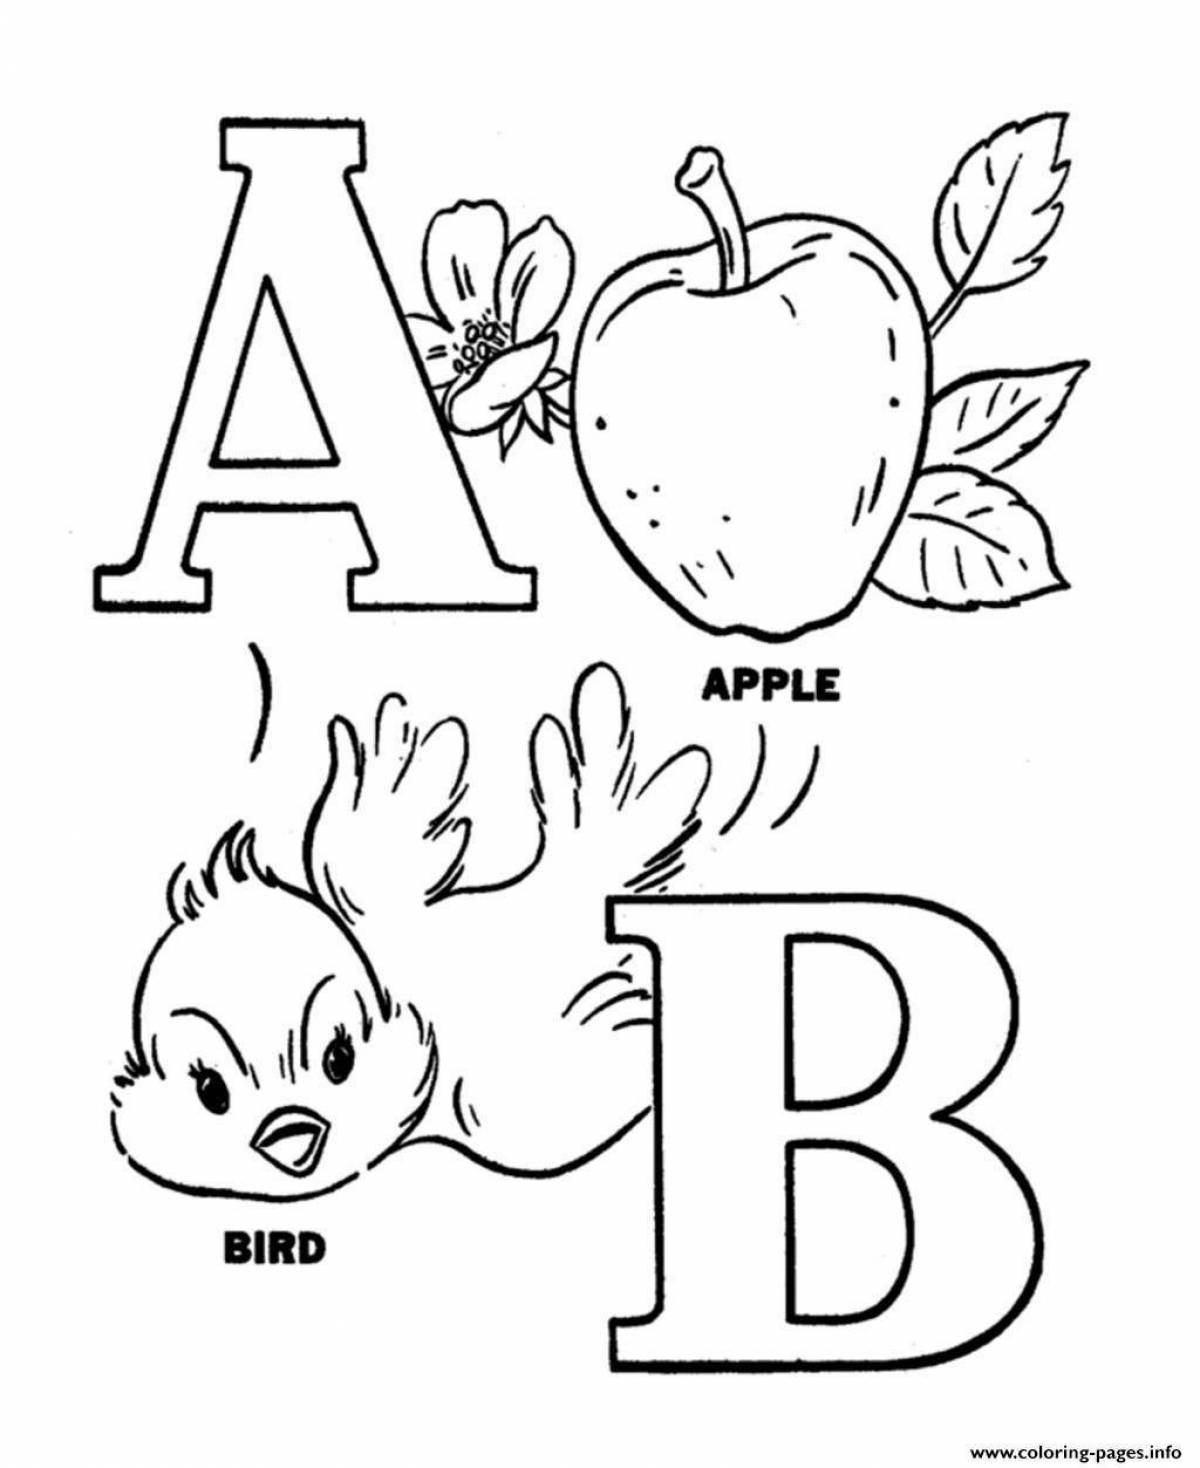 Colorful plant-based coloring books for kids